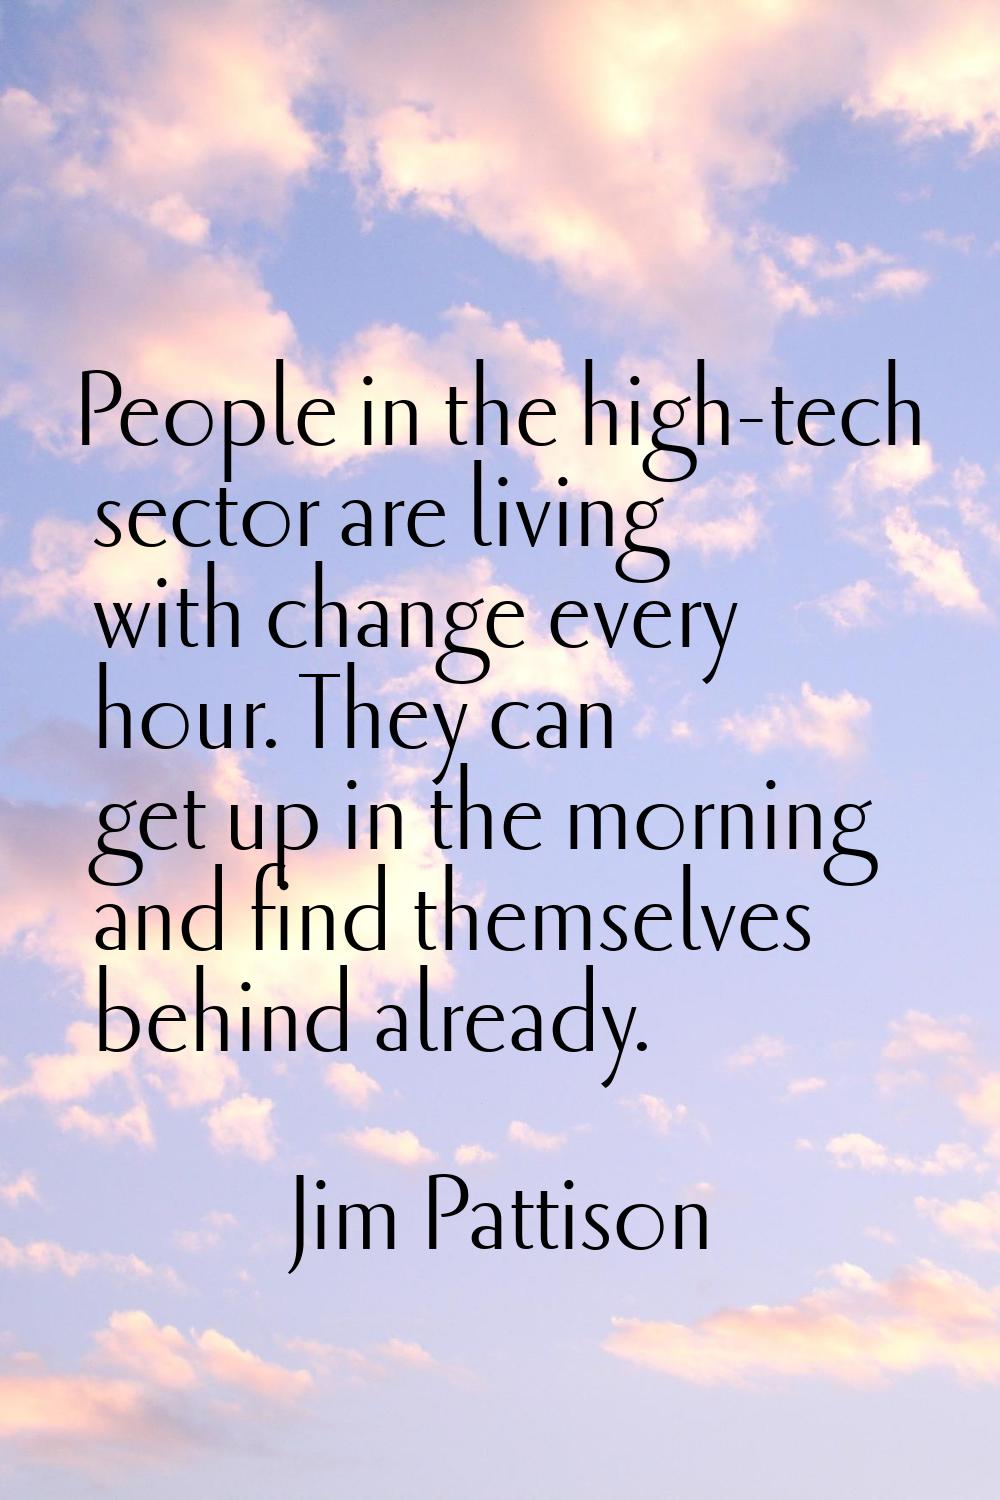 People in the high-tech sector are living with change every hour. They can get up in the morning an